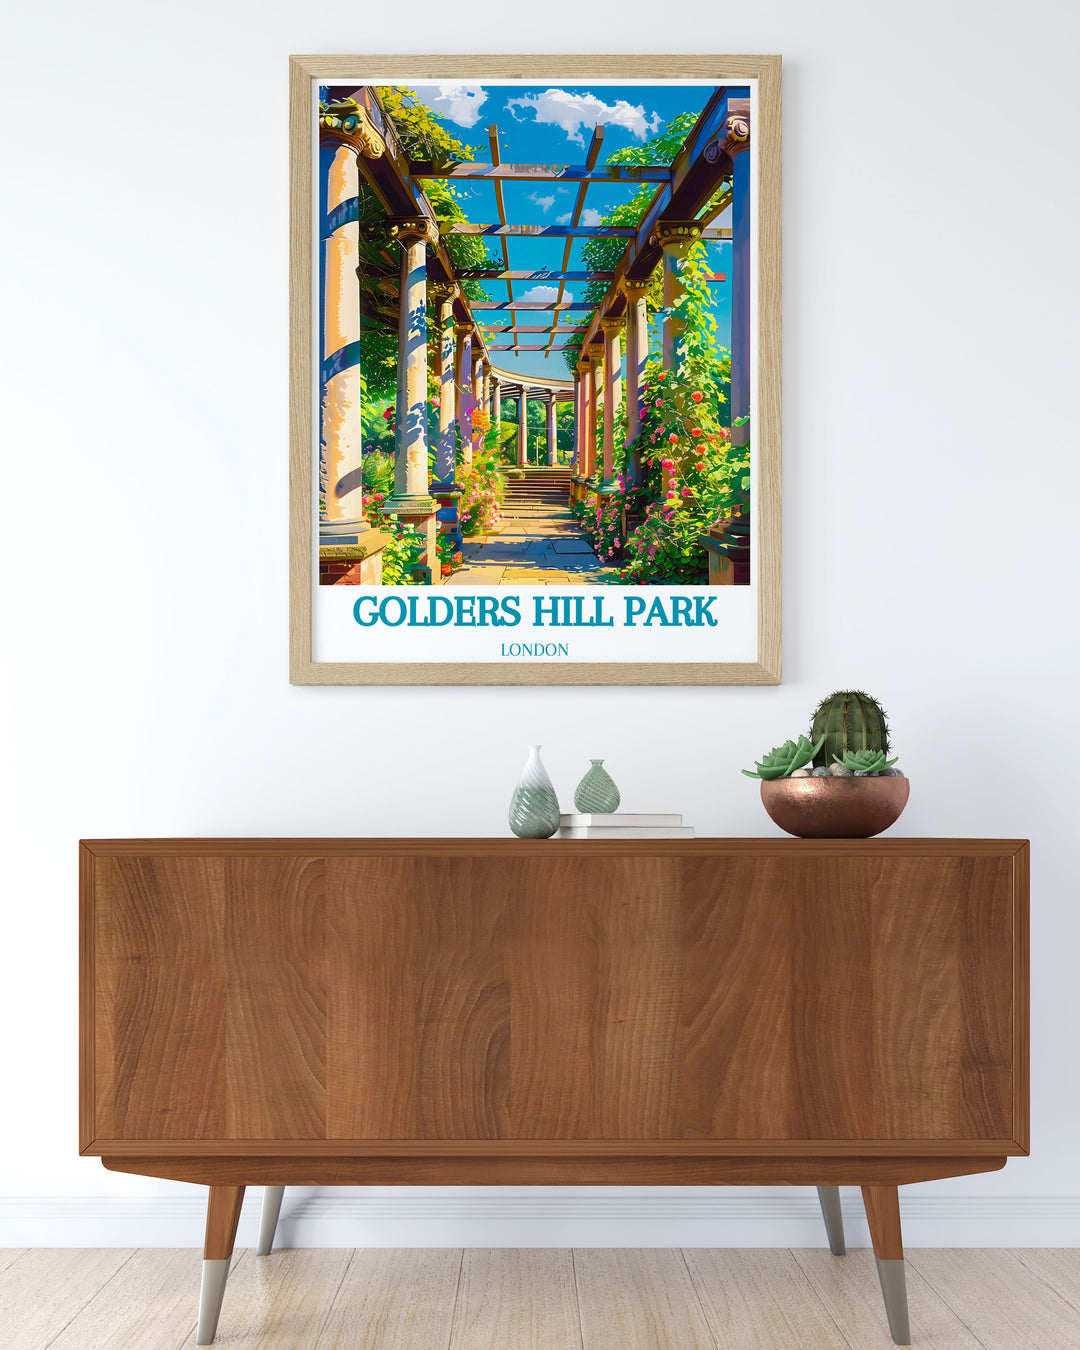 Gallery wall art depicting the tranquil scenery of Golders Hill Park, inviting you to experience the peace and beauty of this hidden gem in North West London, perfect for enhancing your living space with garden charm.